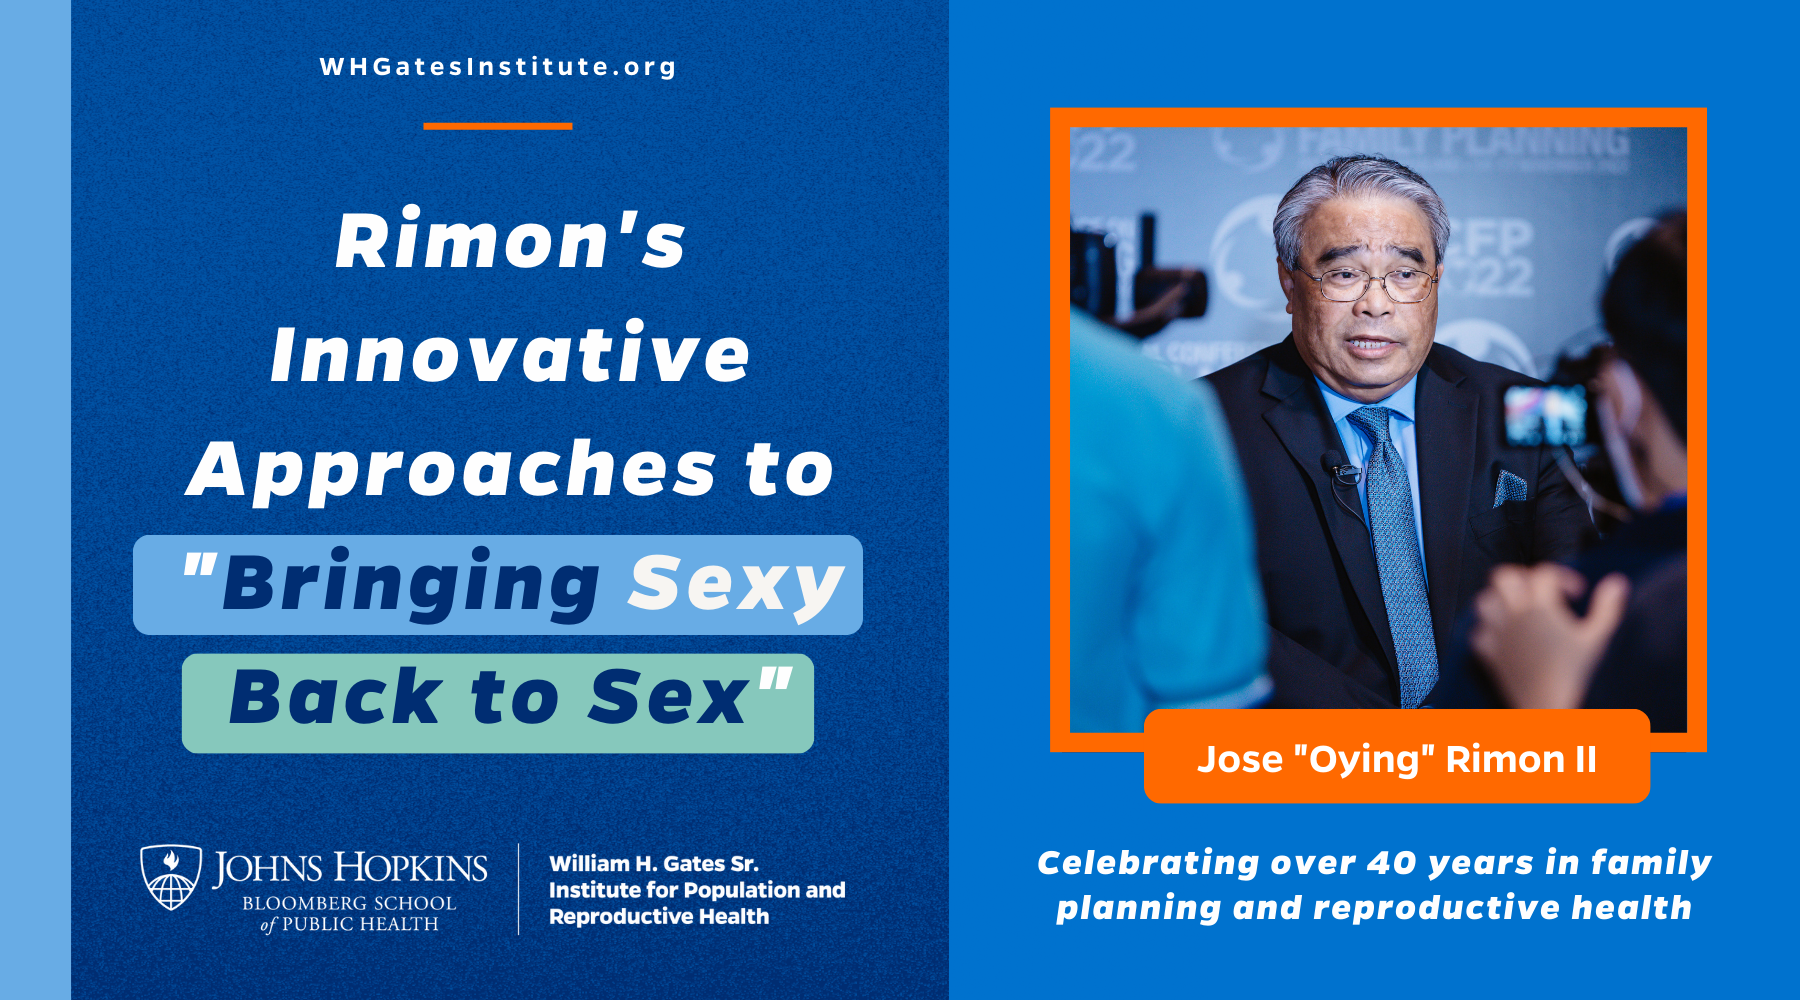 Gates Institute Director Jose ‘Oying’ Rimon to Retire after Distinguished Career Championing Global Health Causes Such as Family Planning and Reproductive Health